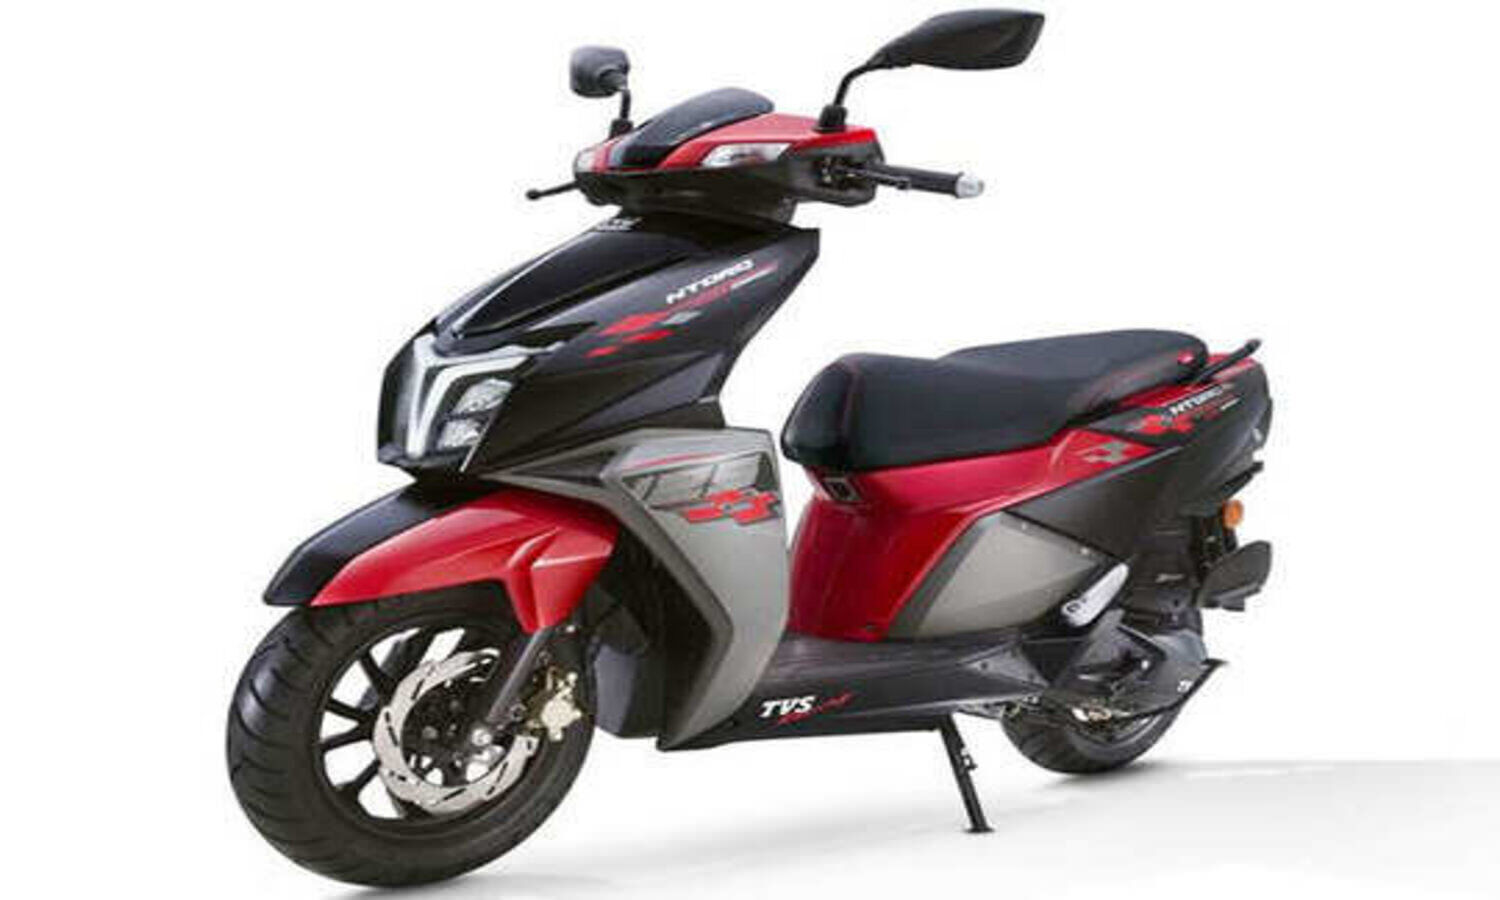 TVS N-Torq 125 Fi: TVS  N-torque 125 Fi is equipped with new technology, can connect 60 features with Bluetooth